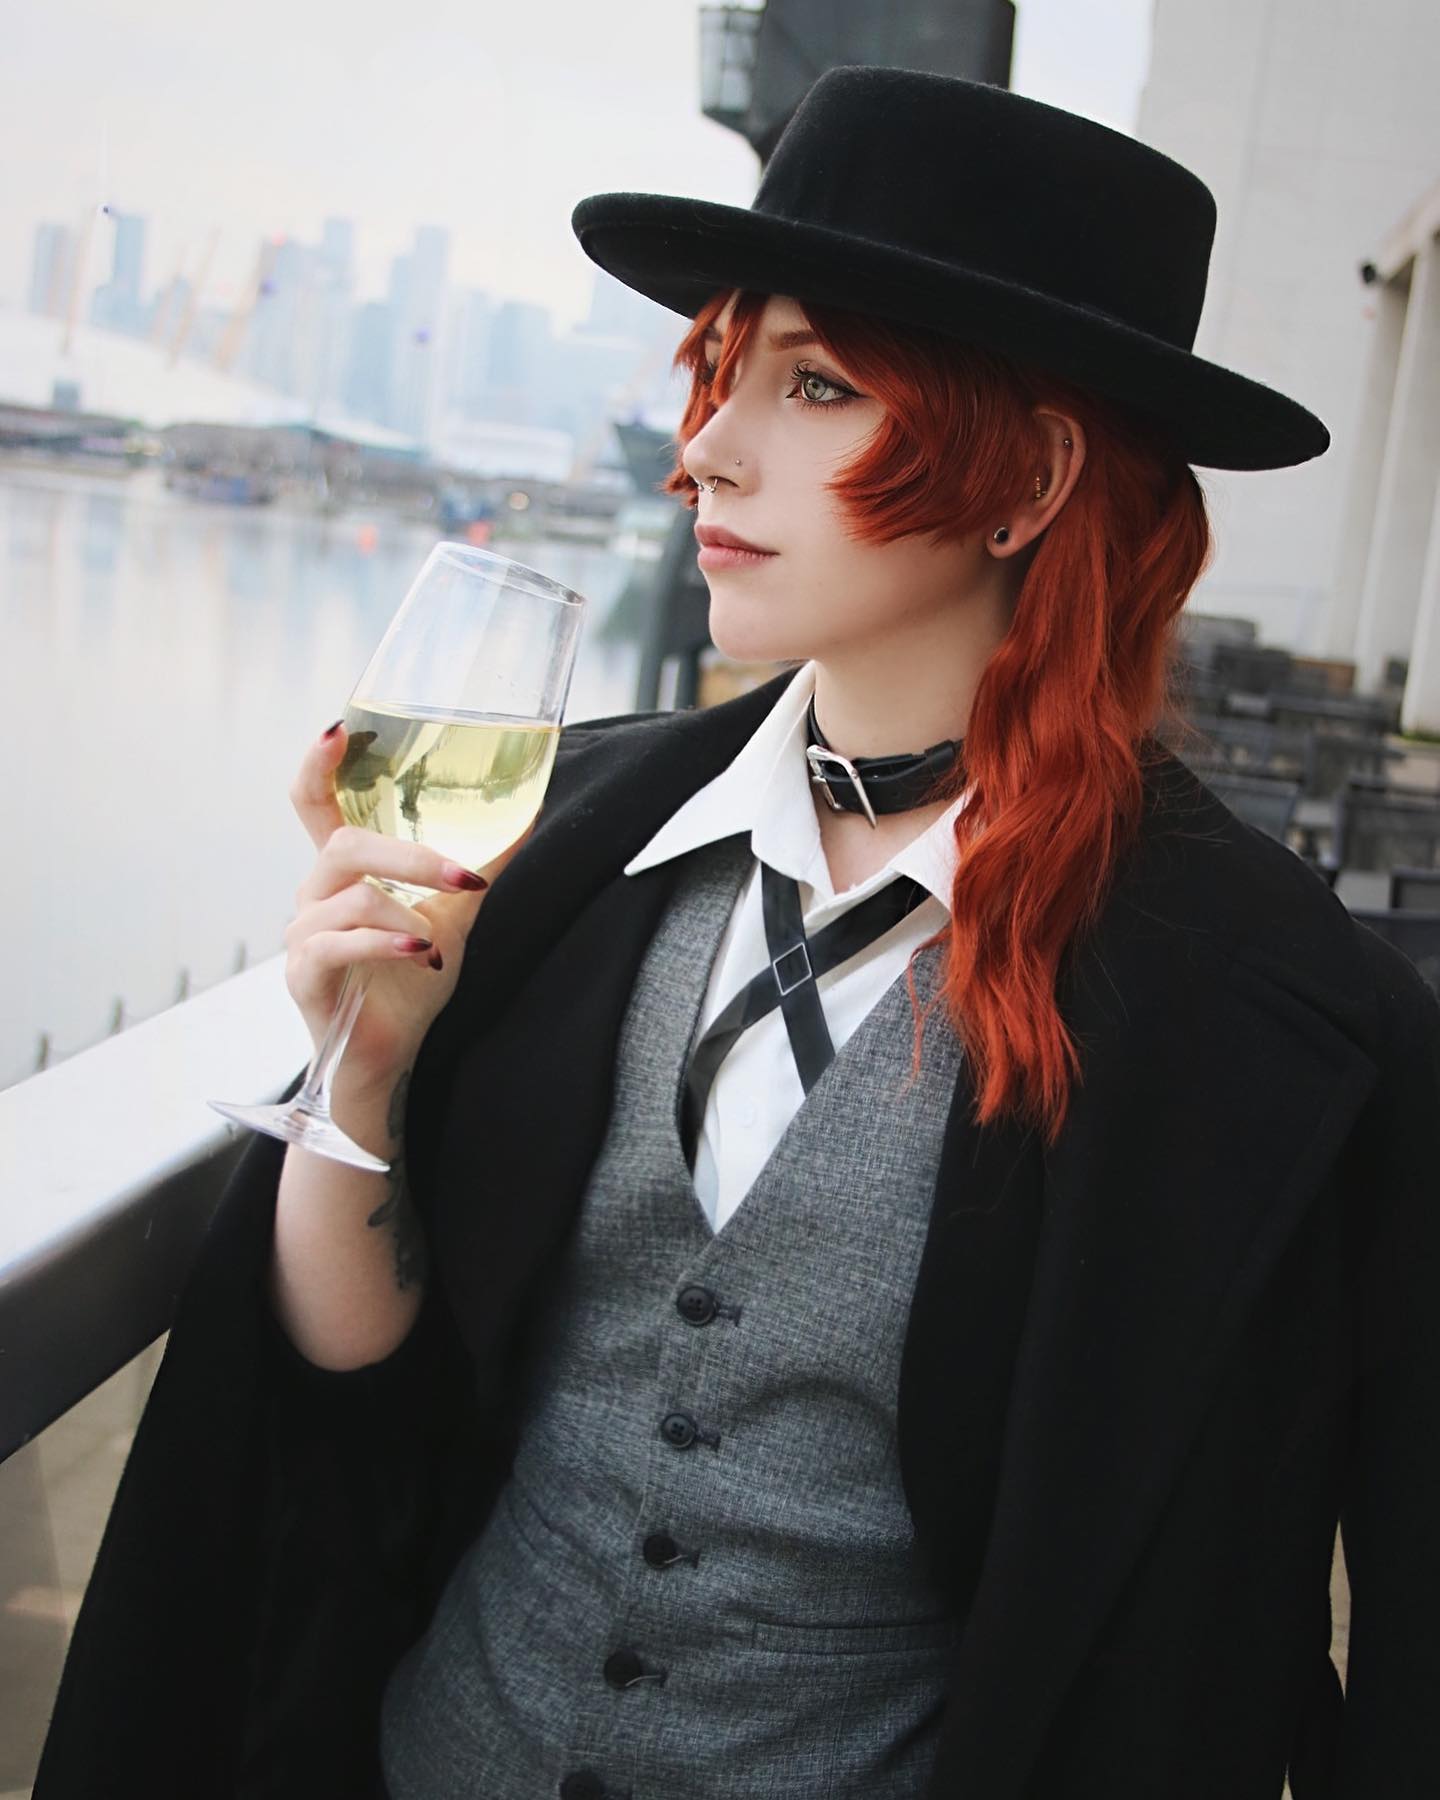 “damn it, this sly bastard is going to ruin my drink.”
~
some more chuuyyaa 🍷 i miss the novotel bar 😂
~
⛓cosplayer: @riotwolf.cos 
🍷character: chuuya nakahara
⛓anime: bungou stray dogs
📸 @hyper.cos @hypercos.photography 
~
~
~
#chuuya #chuuyacosplay #chuuyanakahara #bungoustraydogs #bungoustraydogscosplay #soukoku #bsd #bsdcosplay #bungostraydogs